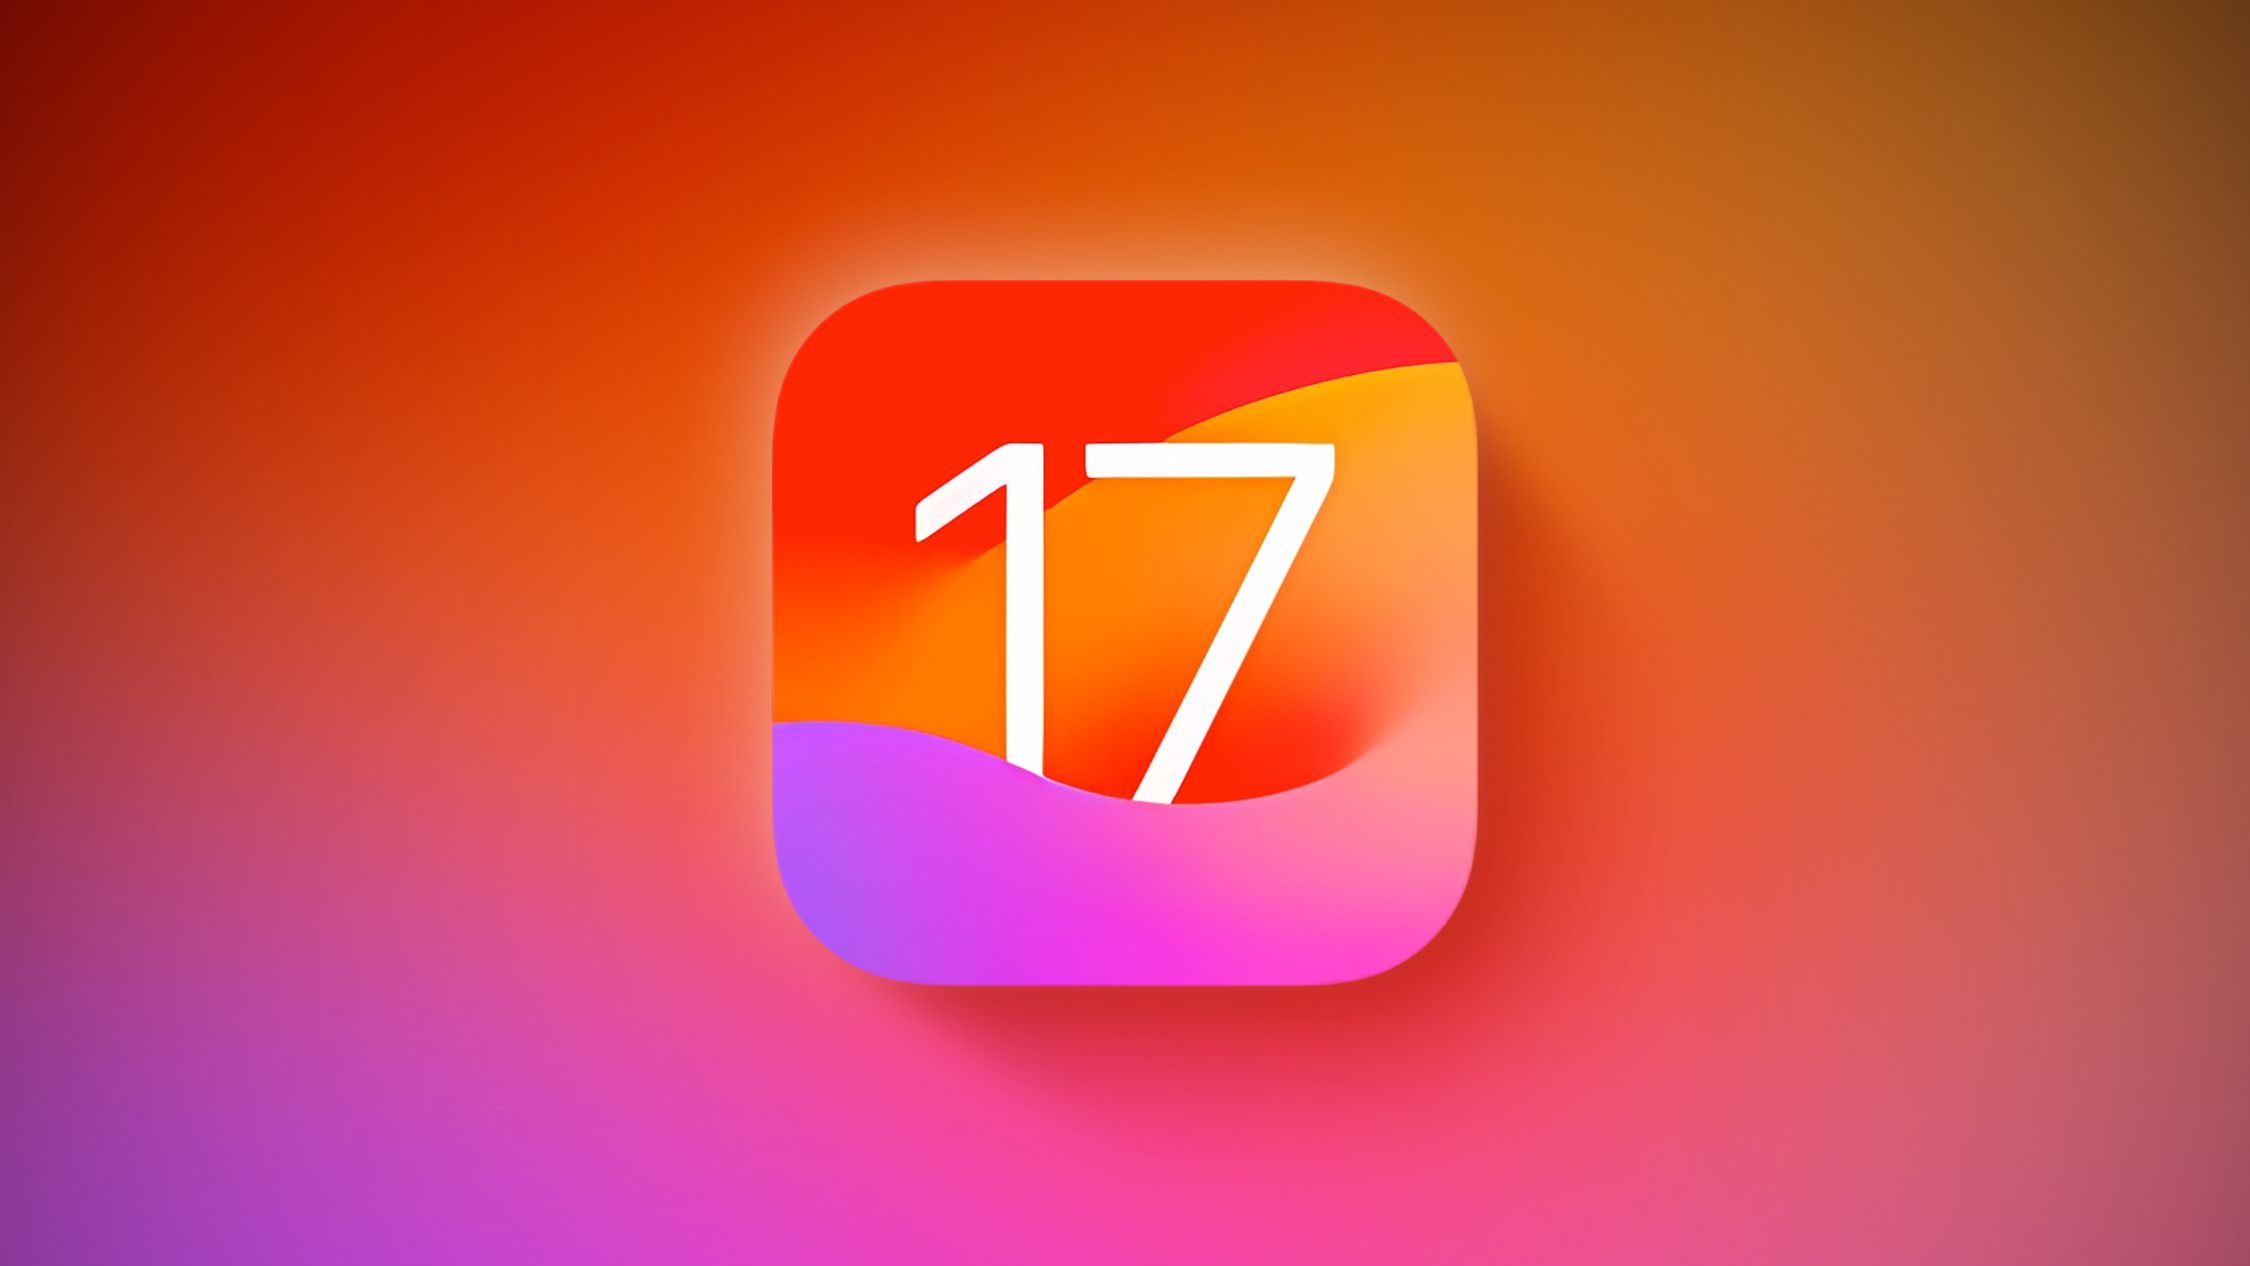 iOS 17 to Launch on September 18, Featuring StandBy Mode, NameDrop, Interactive Widgets, and More